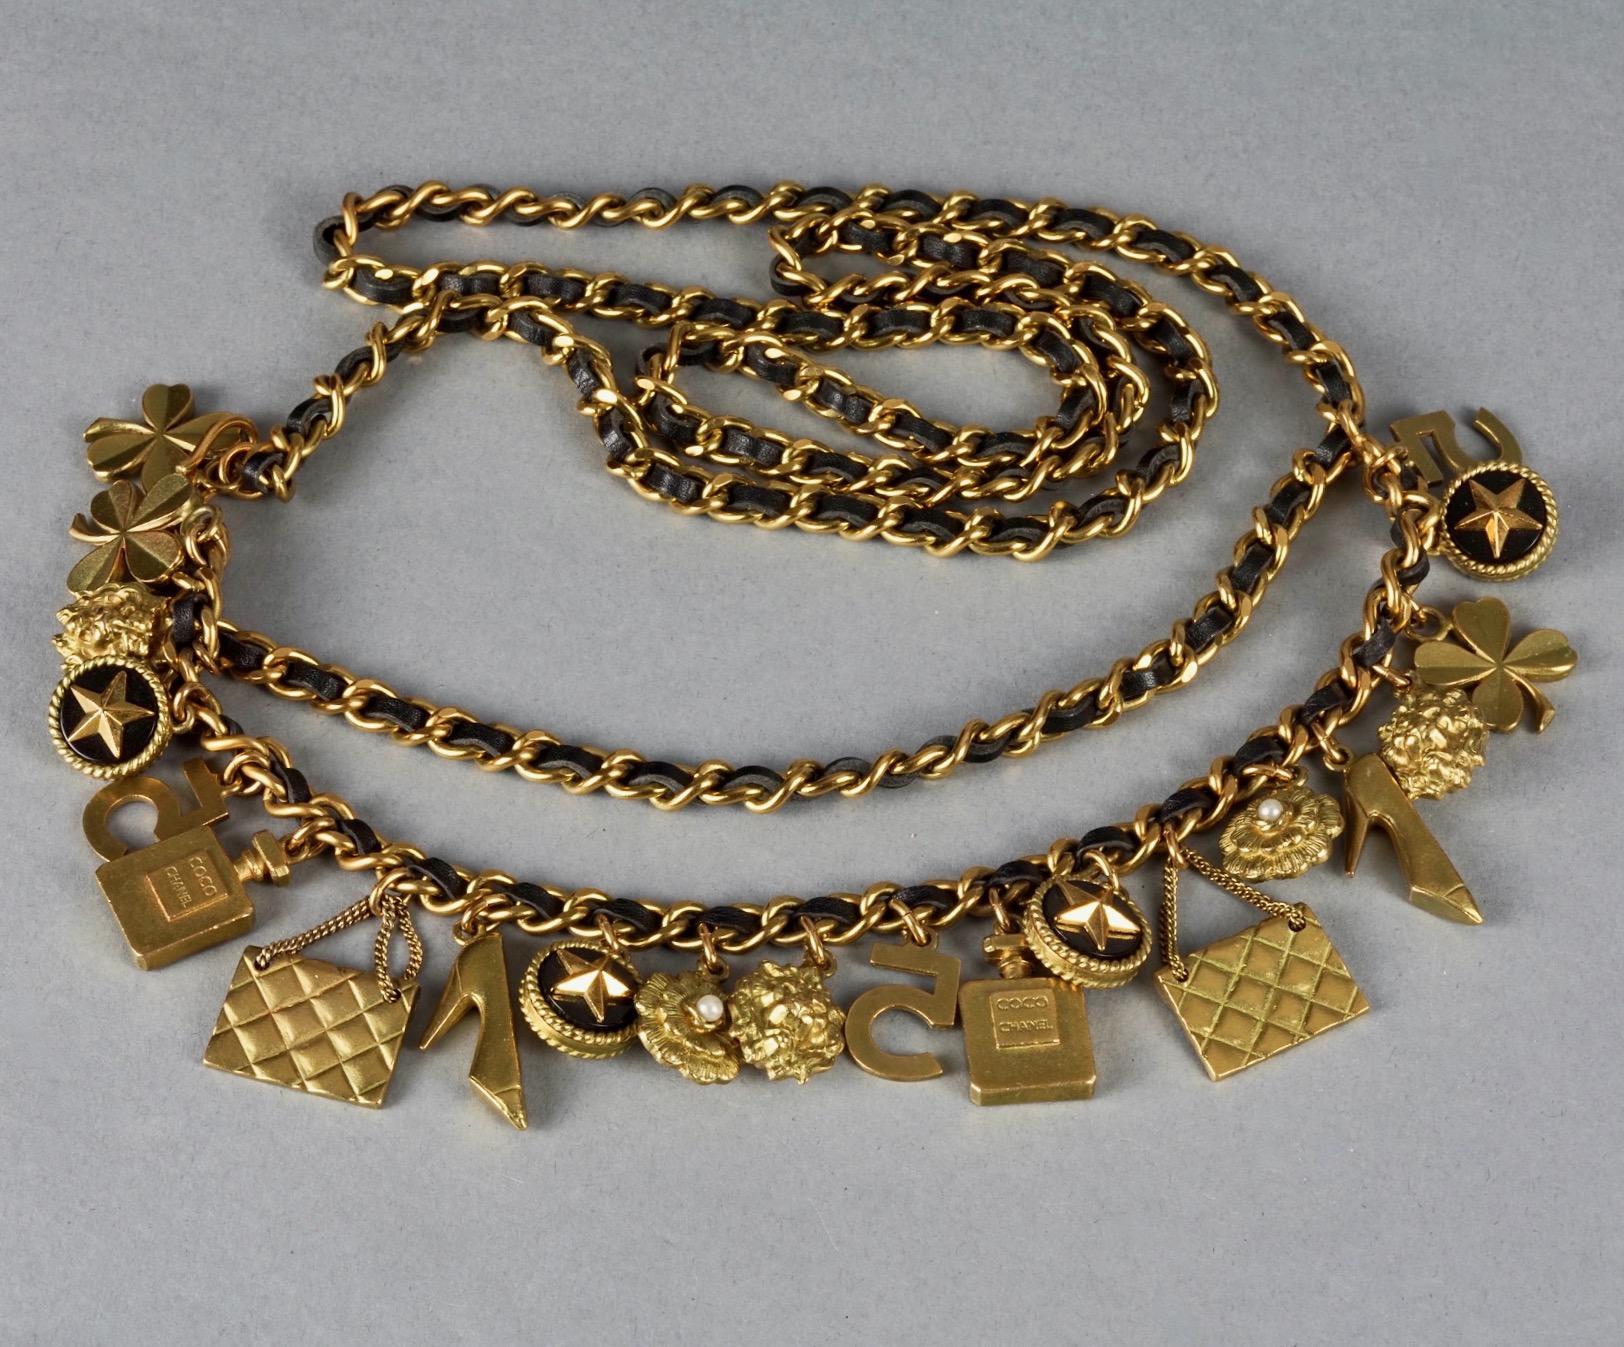 Vintage 1994 CHANEL Lucky Charm Leather Chain Necklace Belt In Excellent Condition For Sale In Kingersheim, Alsace